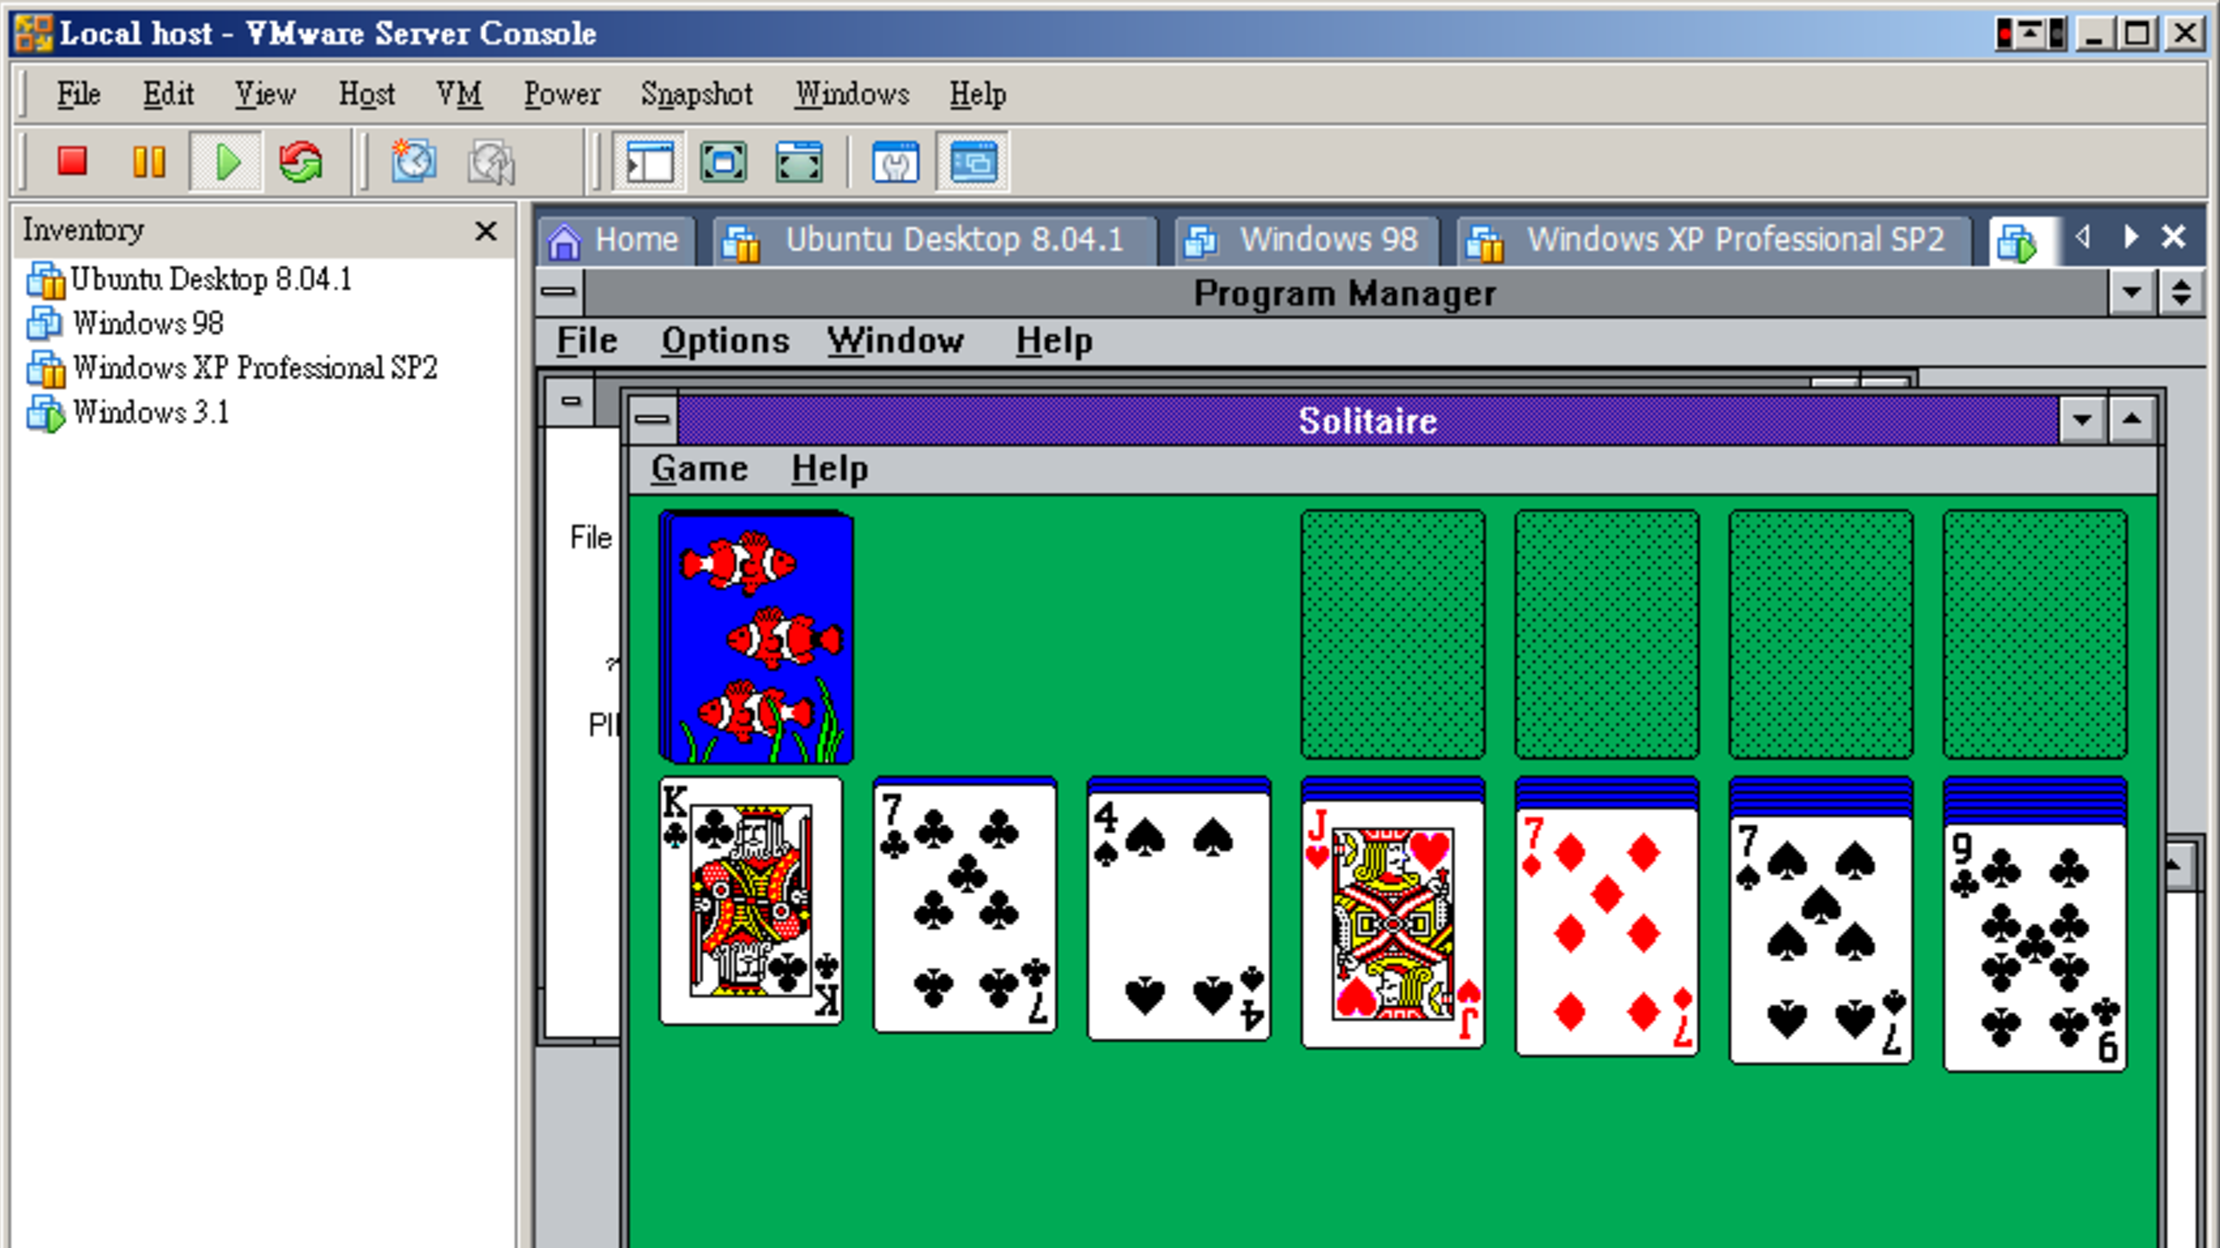 freecell for windows 10 free